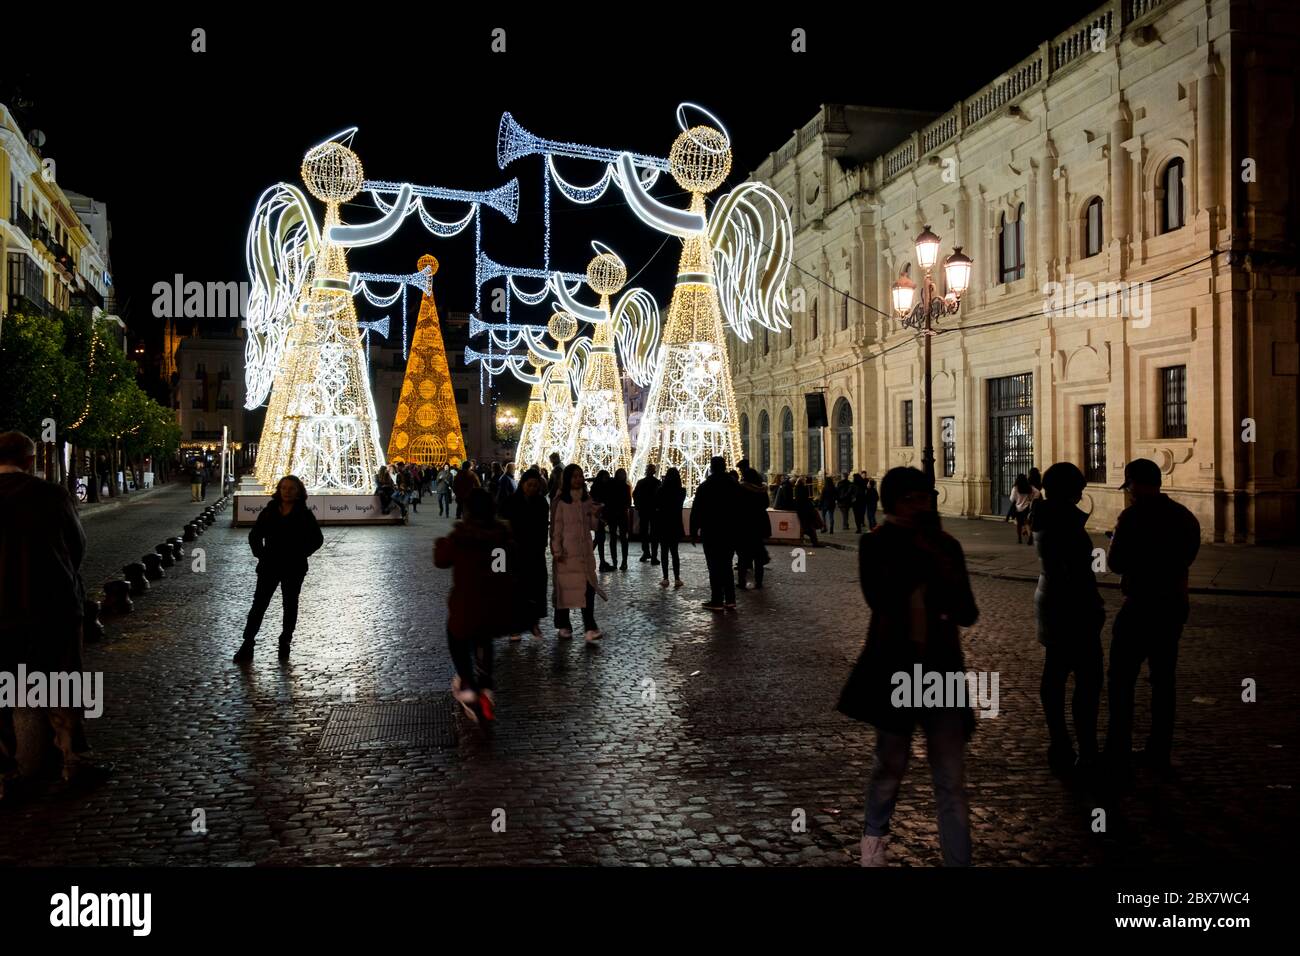 Beautiful Christmas decorations in the shape of an angel illuminate the city. Seville, Andalusia. spain Stock Photo